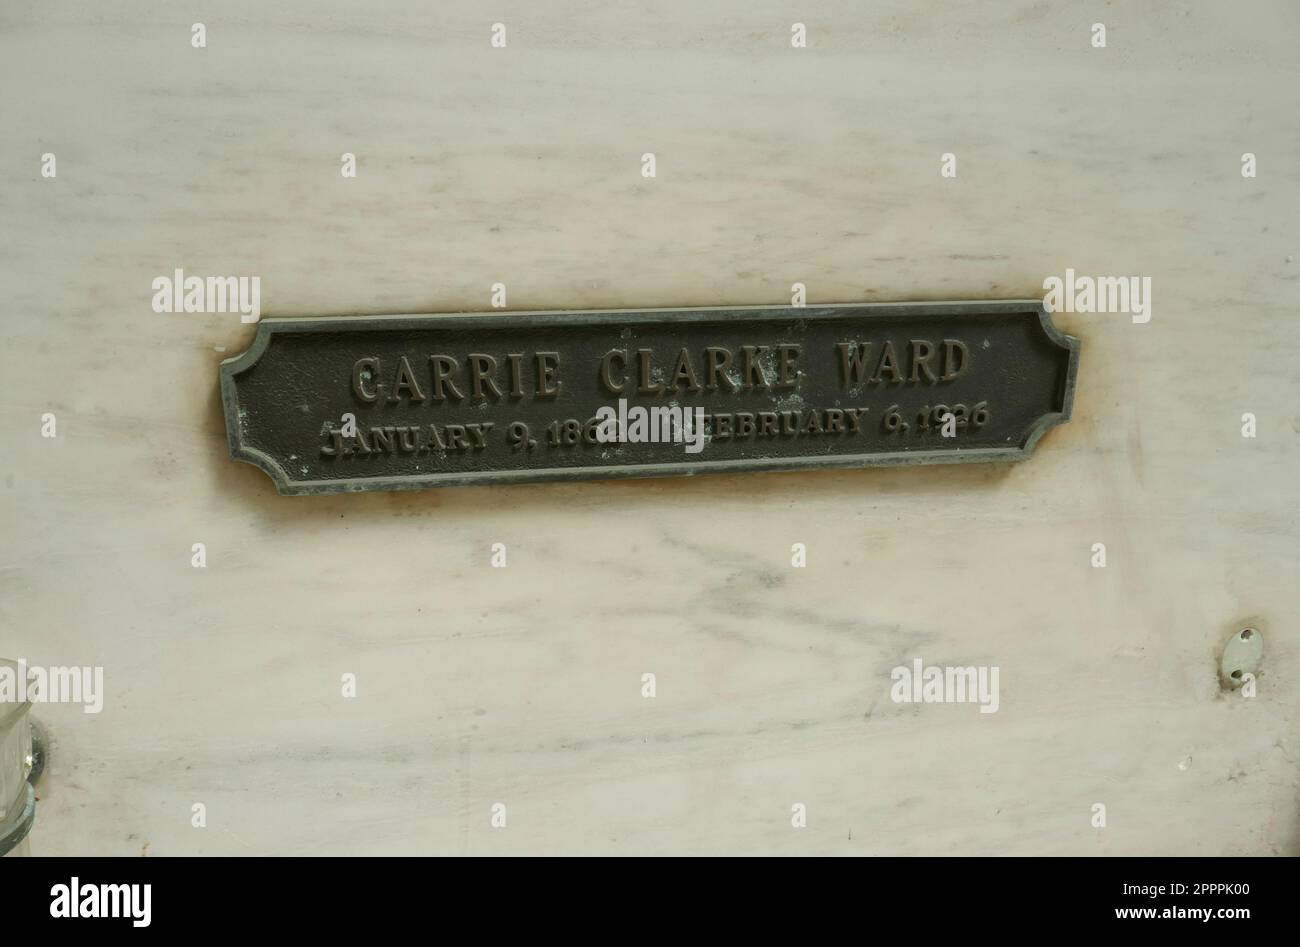 Los Angeles, Kalifornien, USA 20. April 2023 Actrress Carrie Clarke ward Grave im ABC Mausoleum auf dem Hollywood Forever Cemetery am 20. April 2023 in Los Angeles, Kalifornien, USA. Foto: Barry King/Alamy Stock Photo Stockfoto